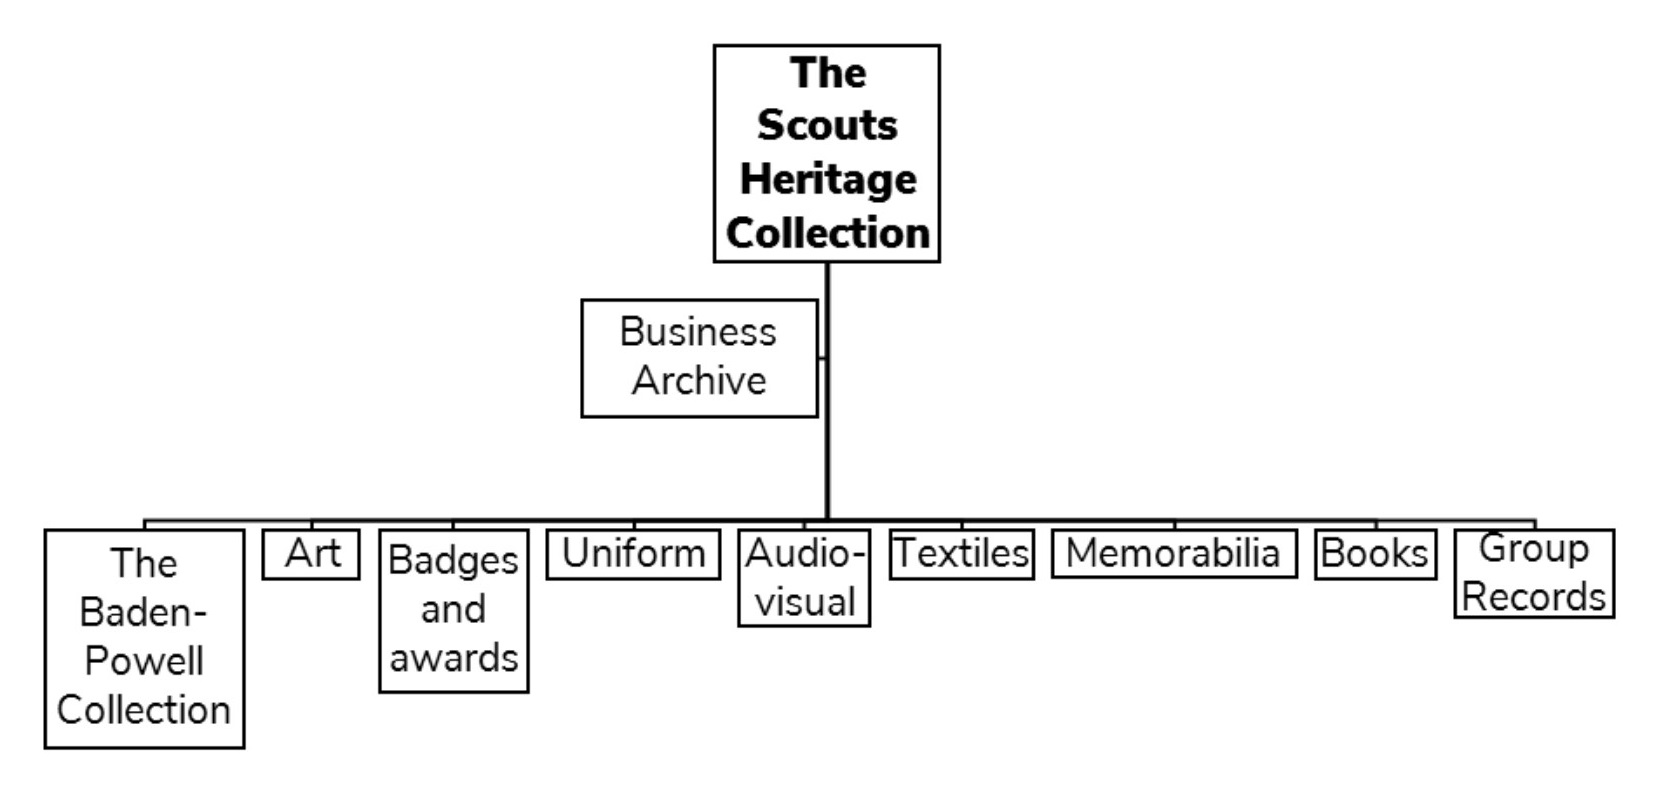 The collections structure